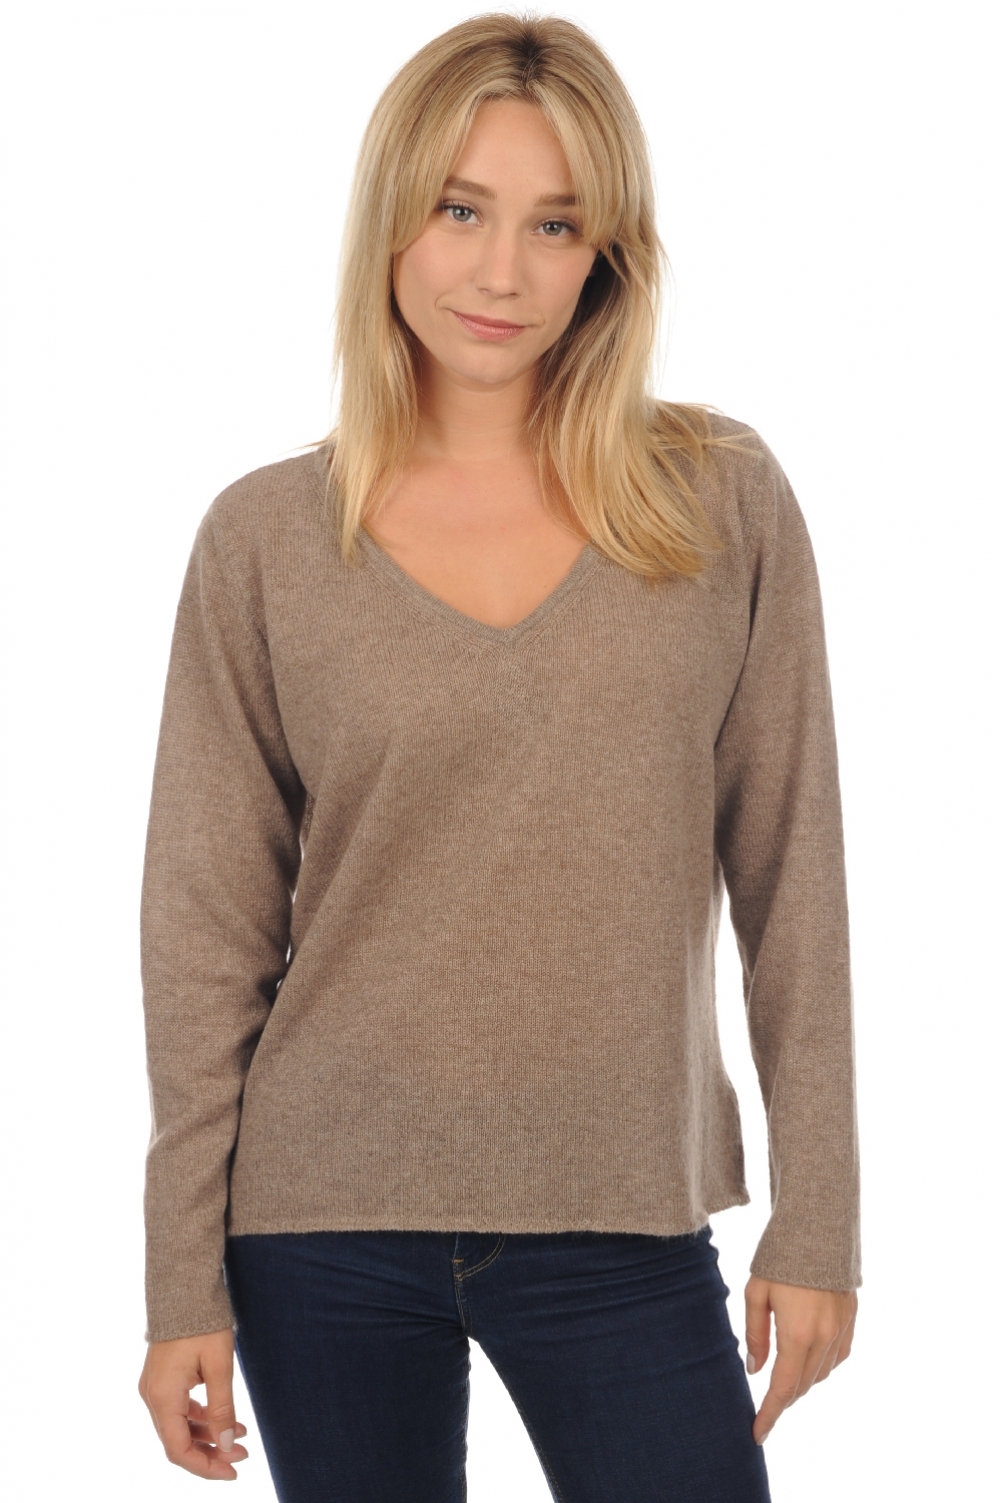 Cashmere ladies basic sweaters at low prices flavie natural brown 3xl